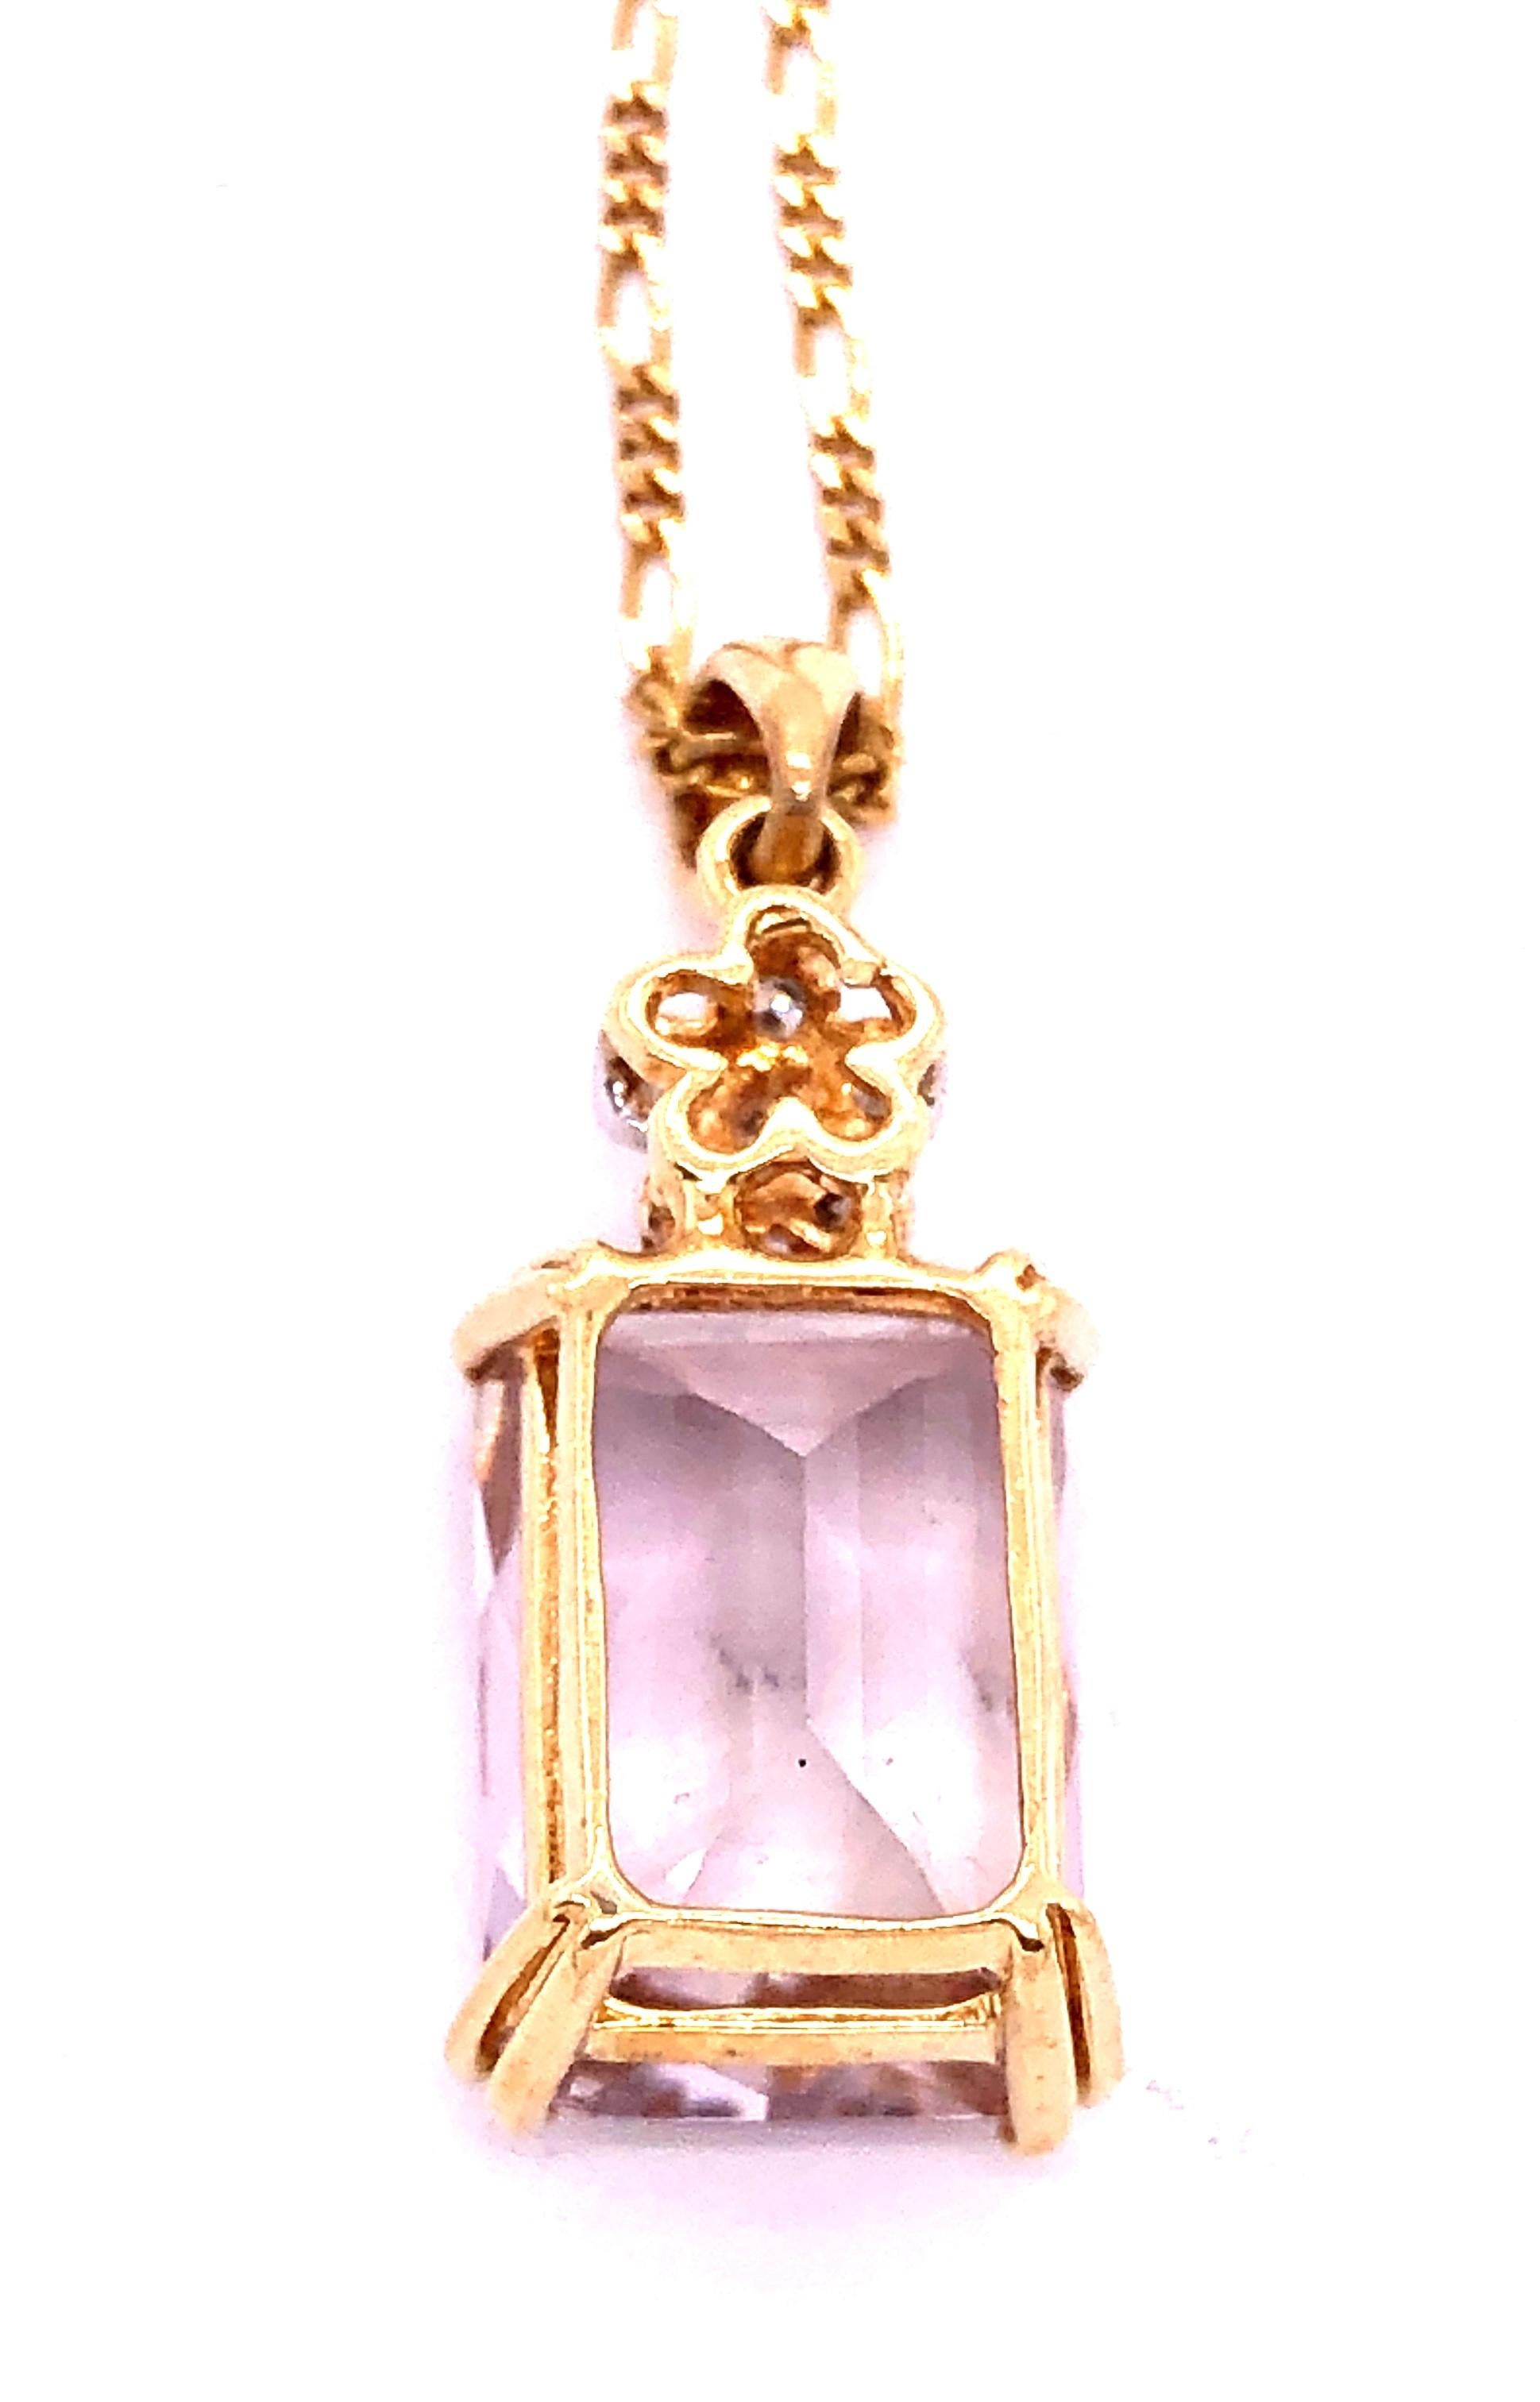 14 Karat Yellow Gold Necklace with Semi Precious Stone Pendant For Sale 4